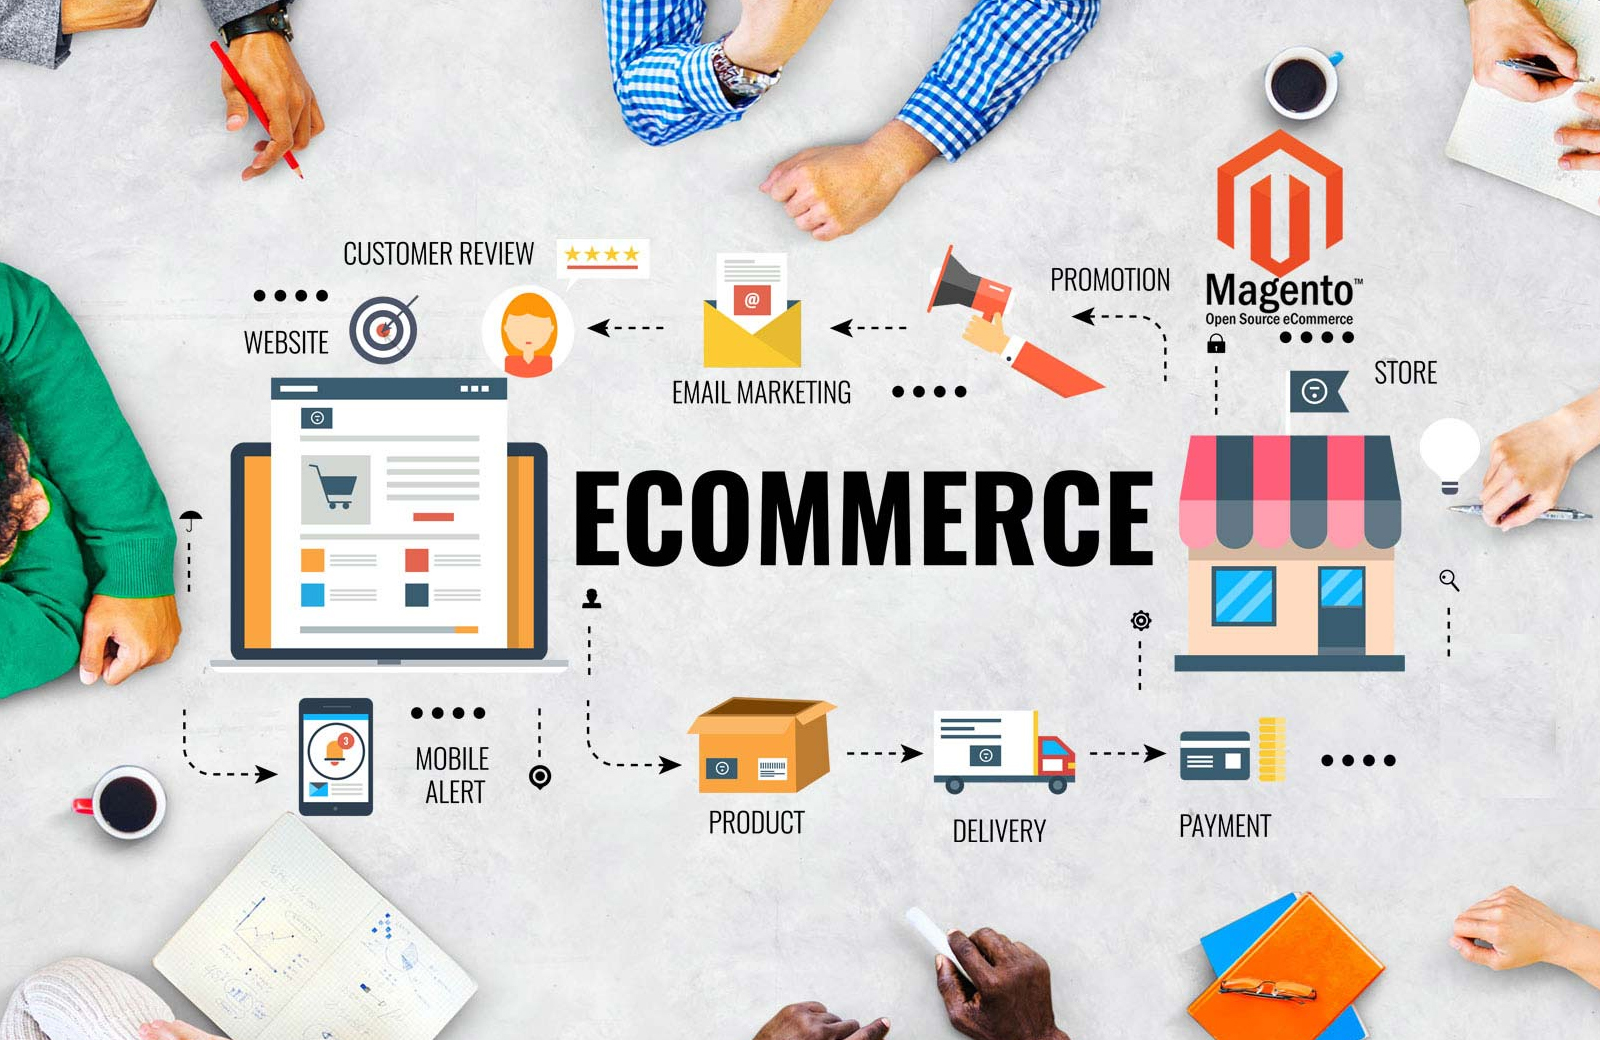 advantages of magento ecommerce development for small businesses